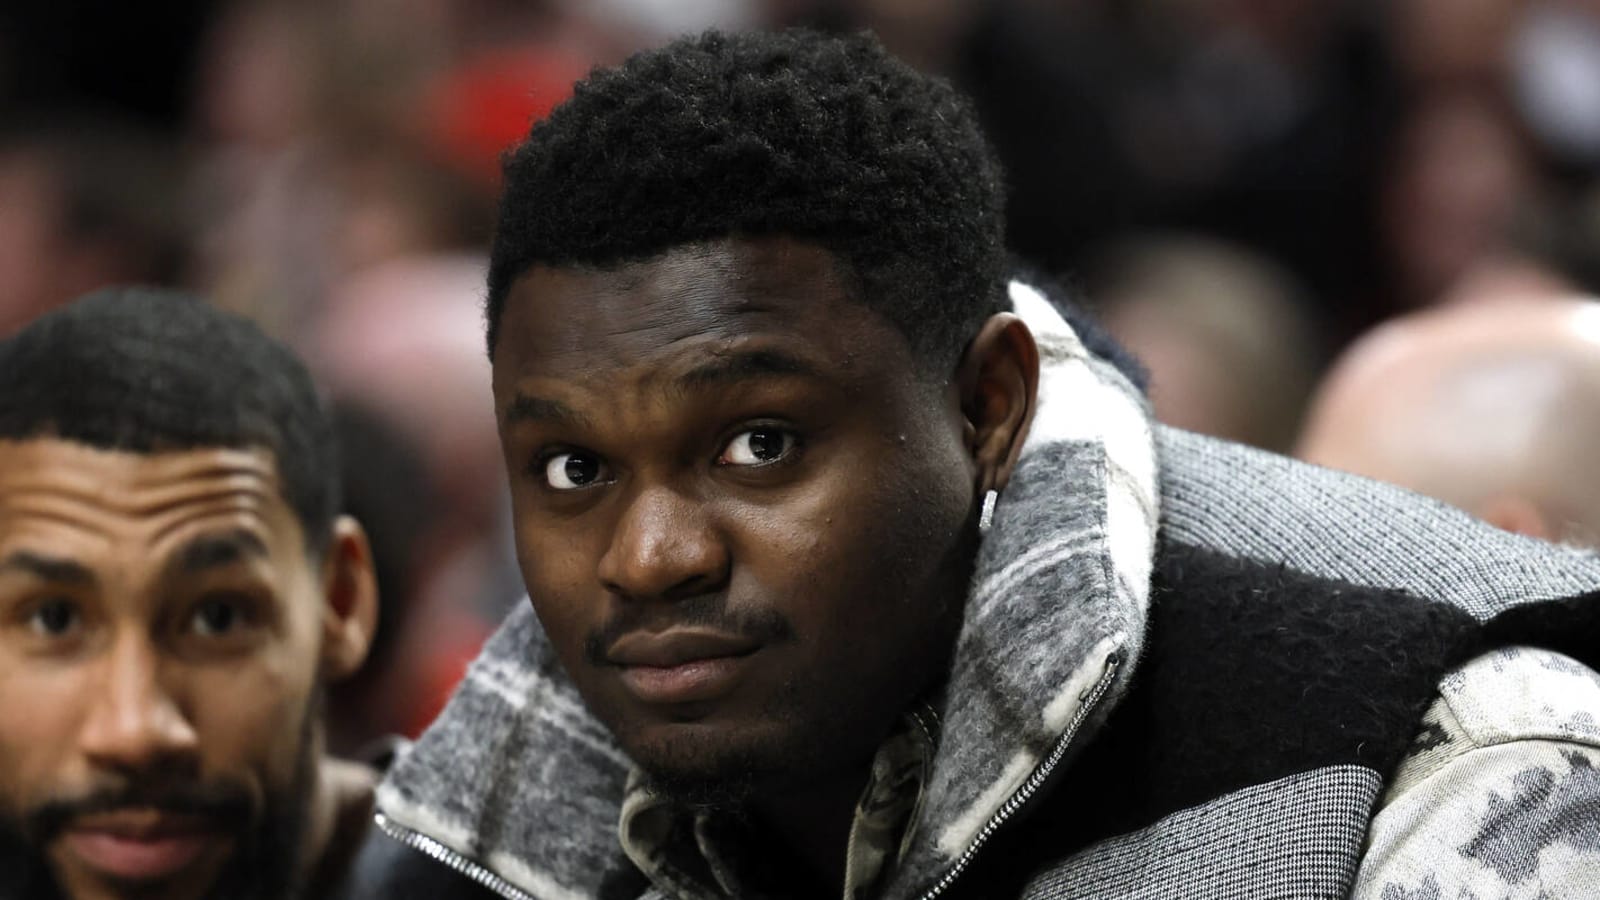 Video of Zion Williamson warming up creates more questions